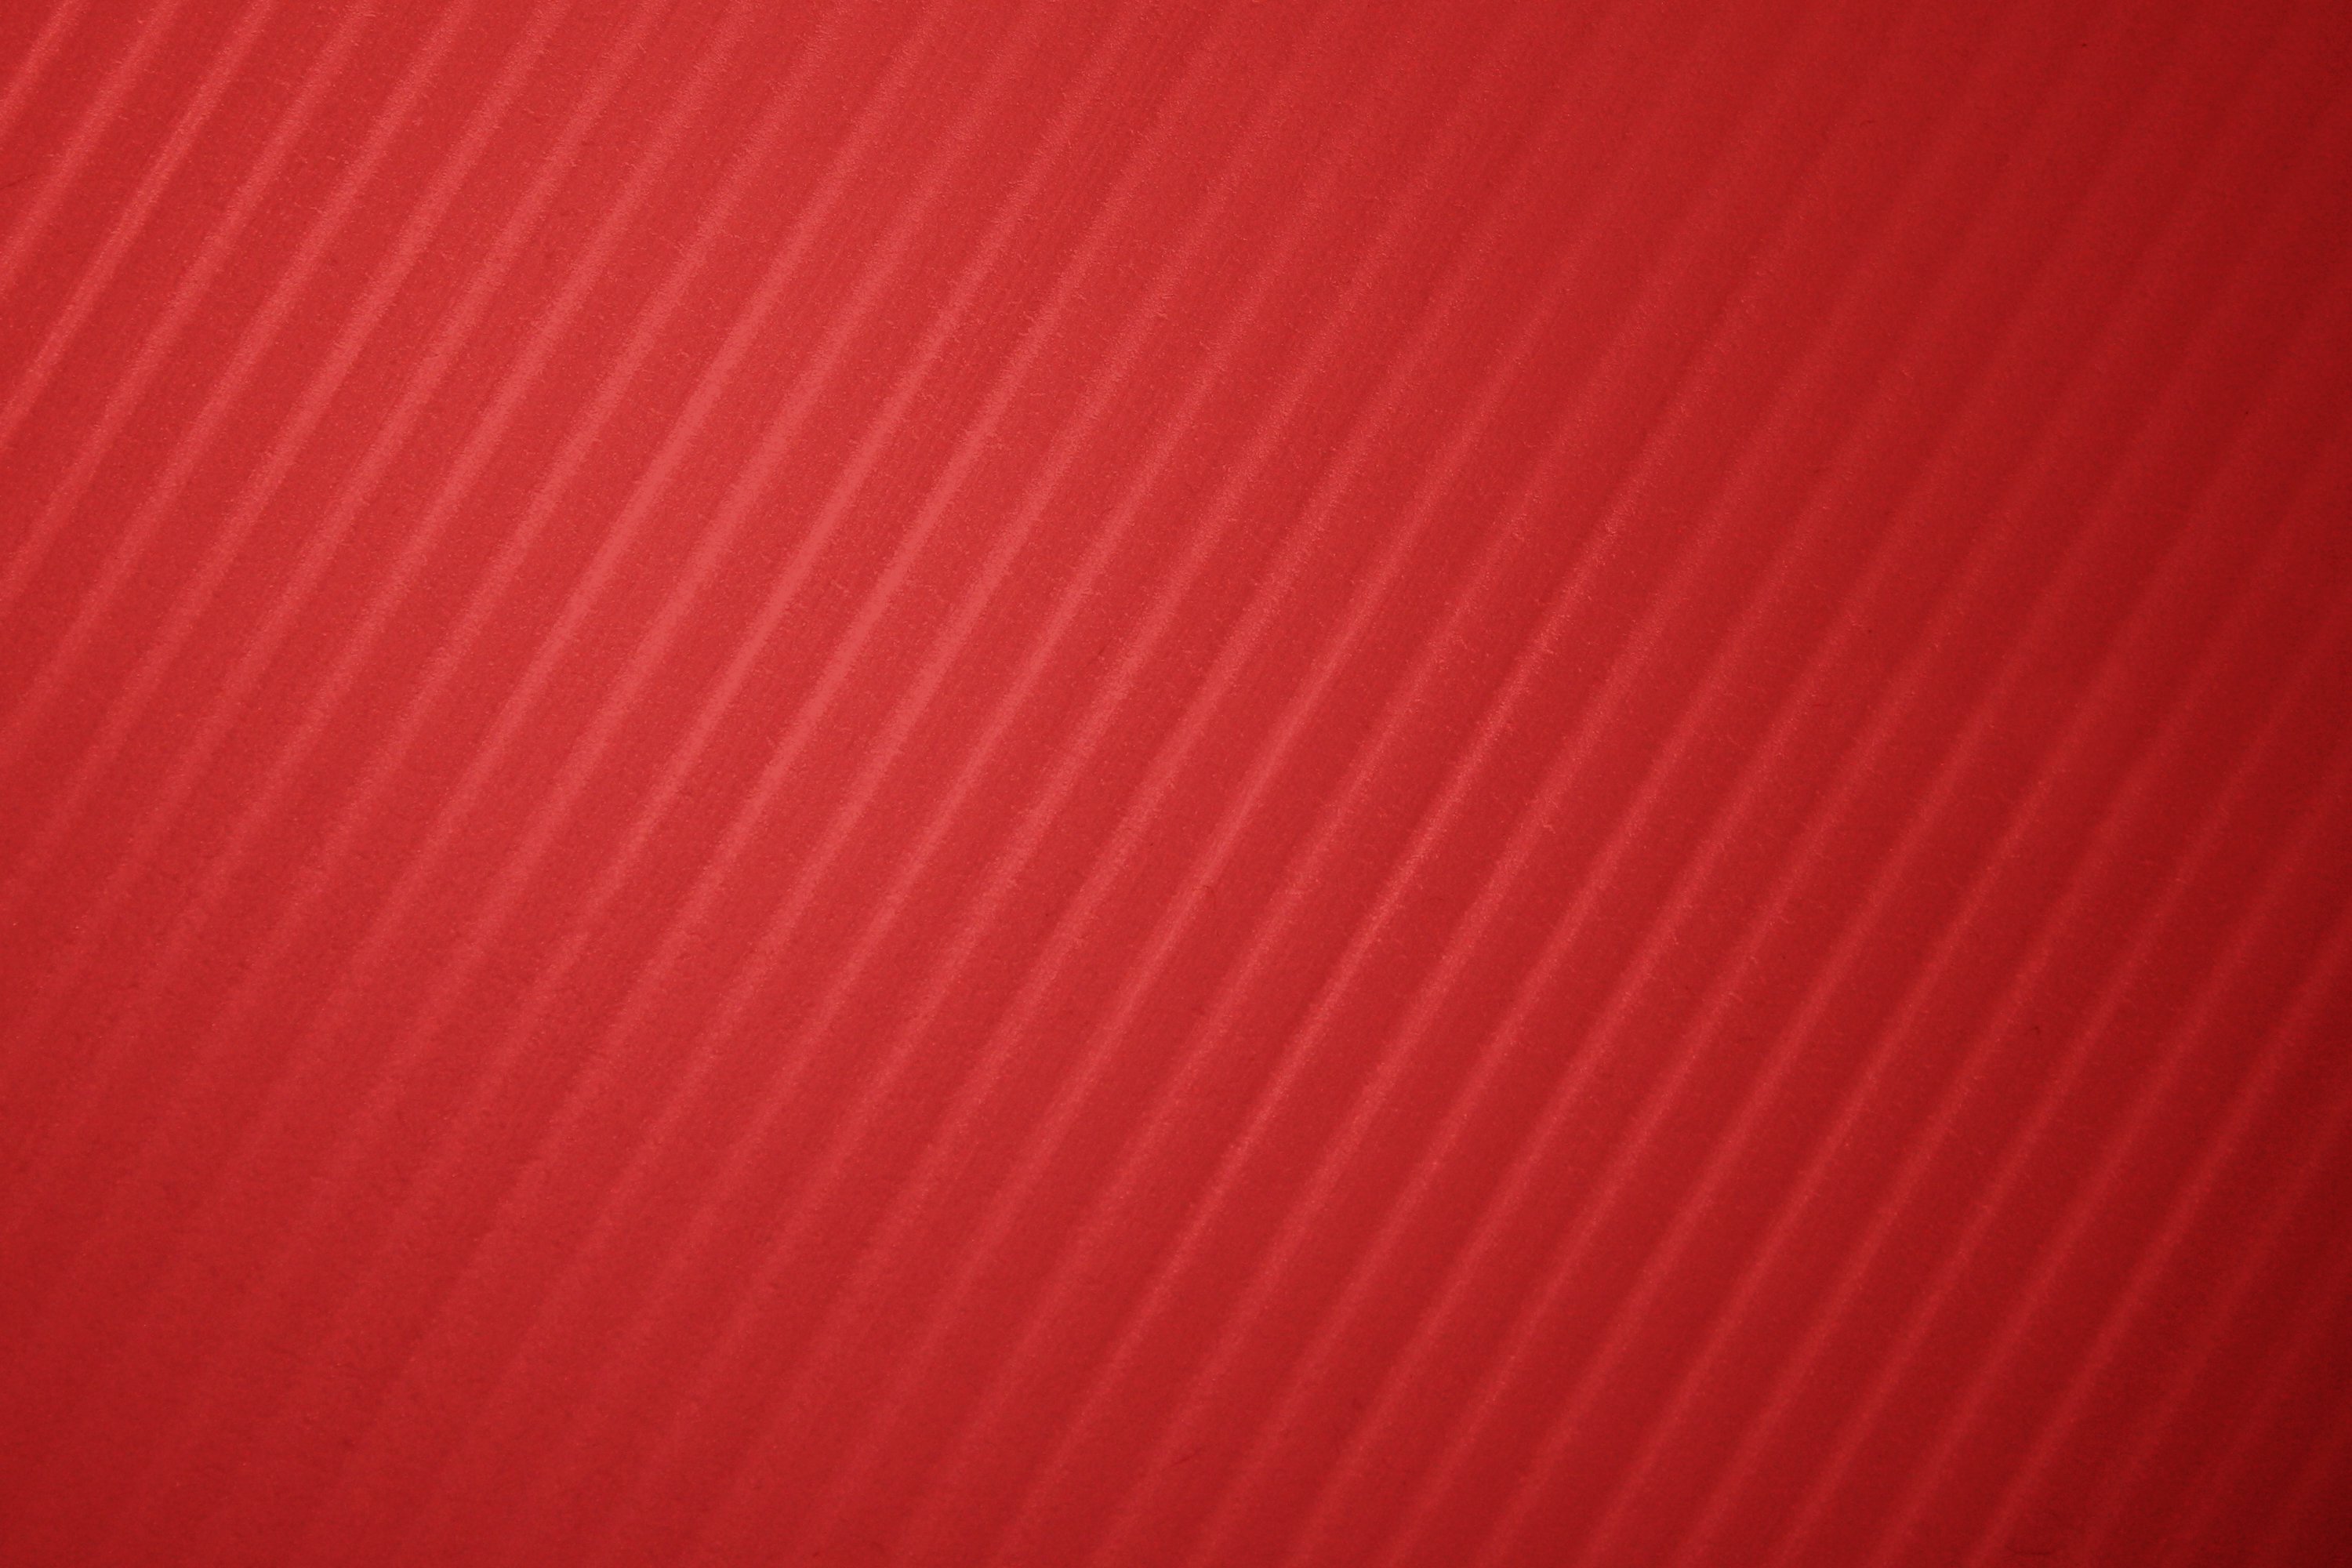 Red Diagonal Striped Plastic Texture High Resolution Photo